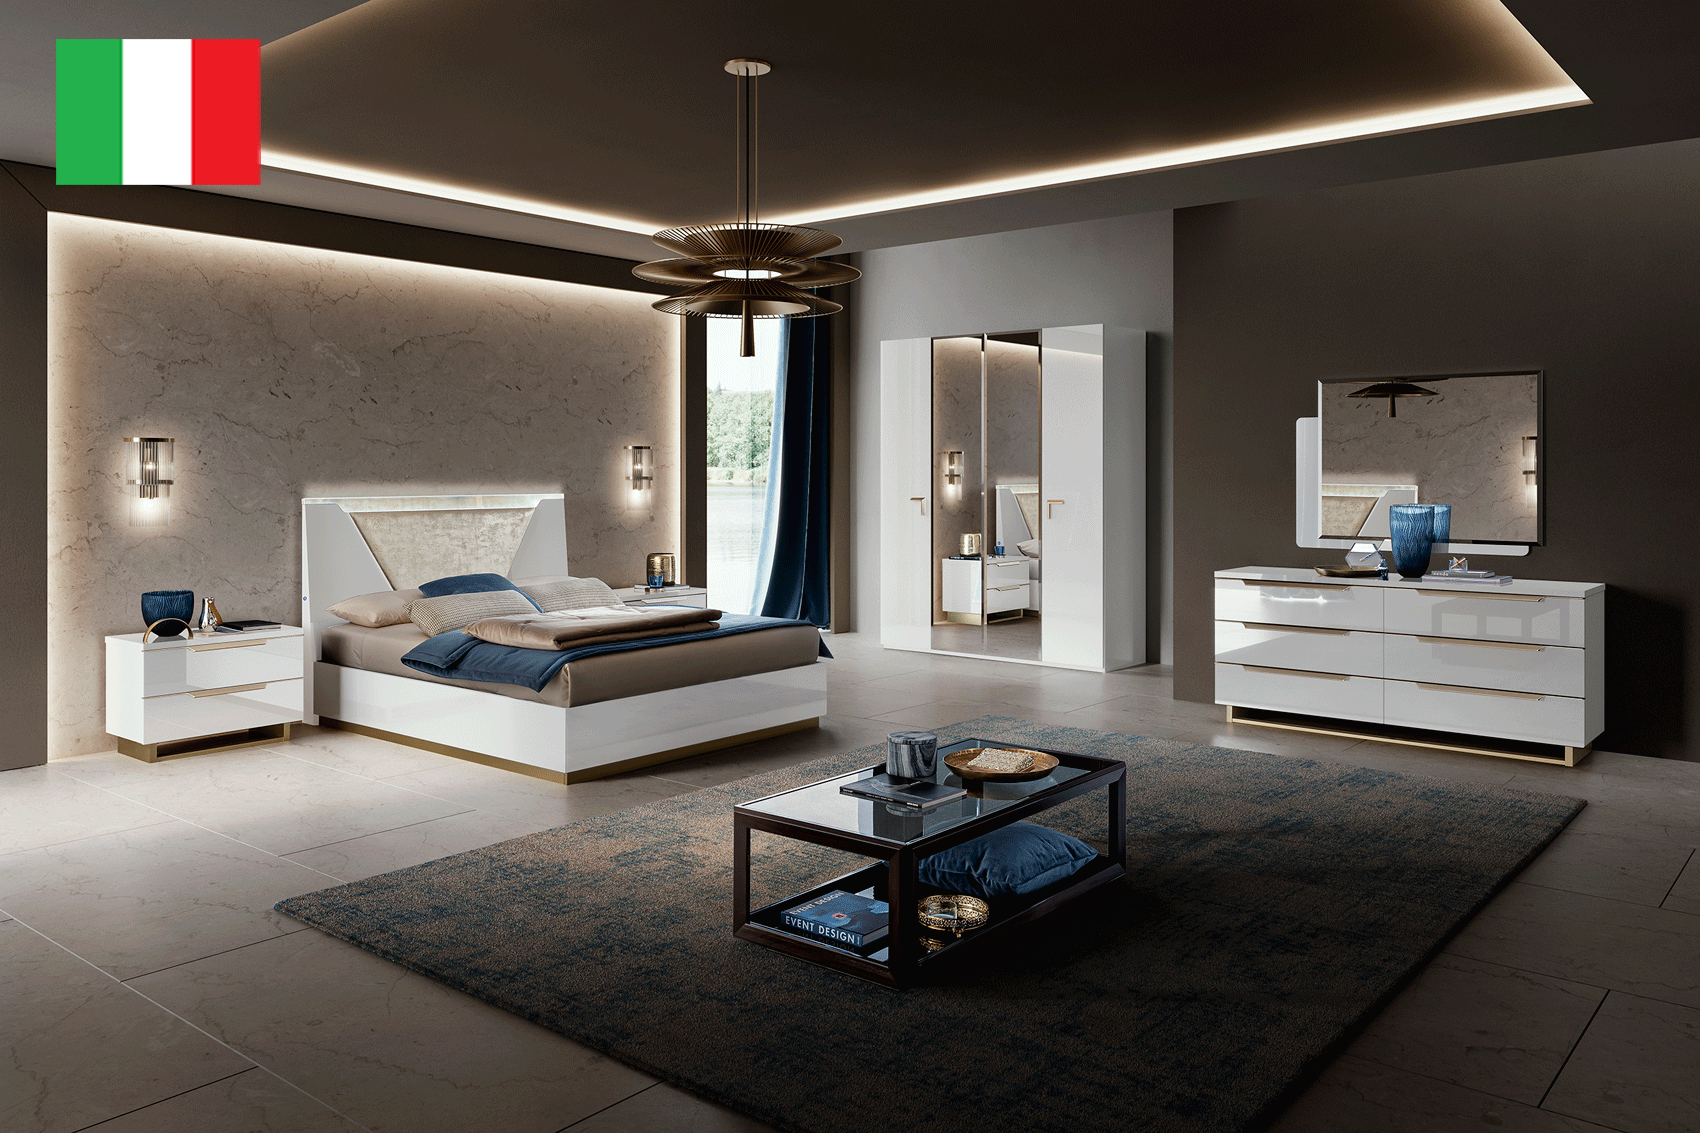 Wallunits Hallway Console tables and Mirrors Smart Bedroom White by Camelgroup – Italy